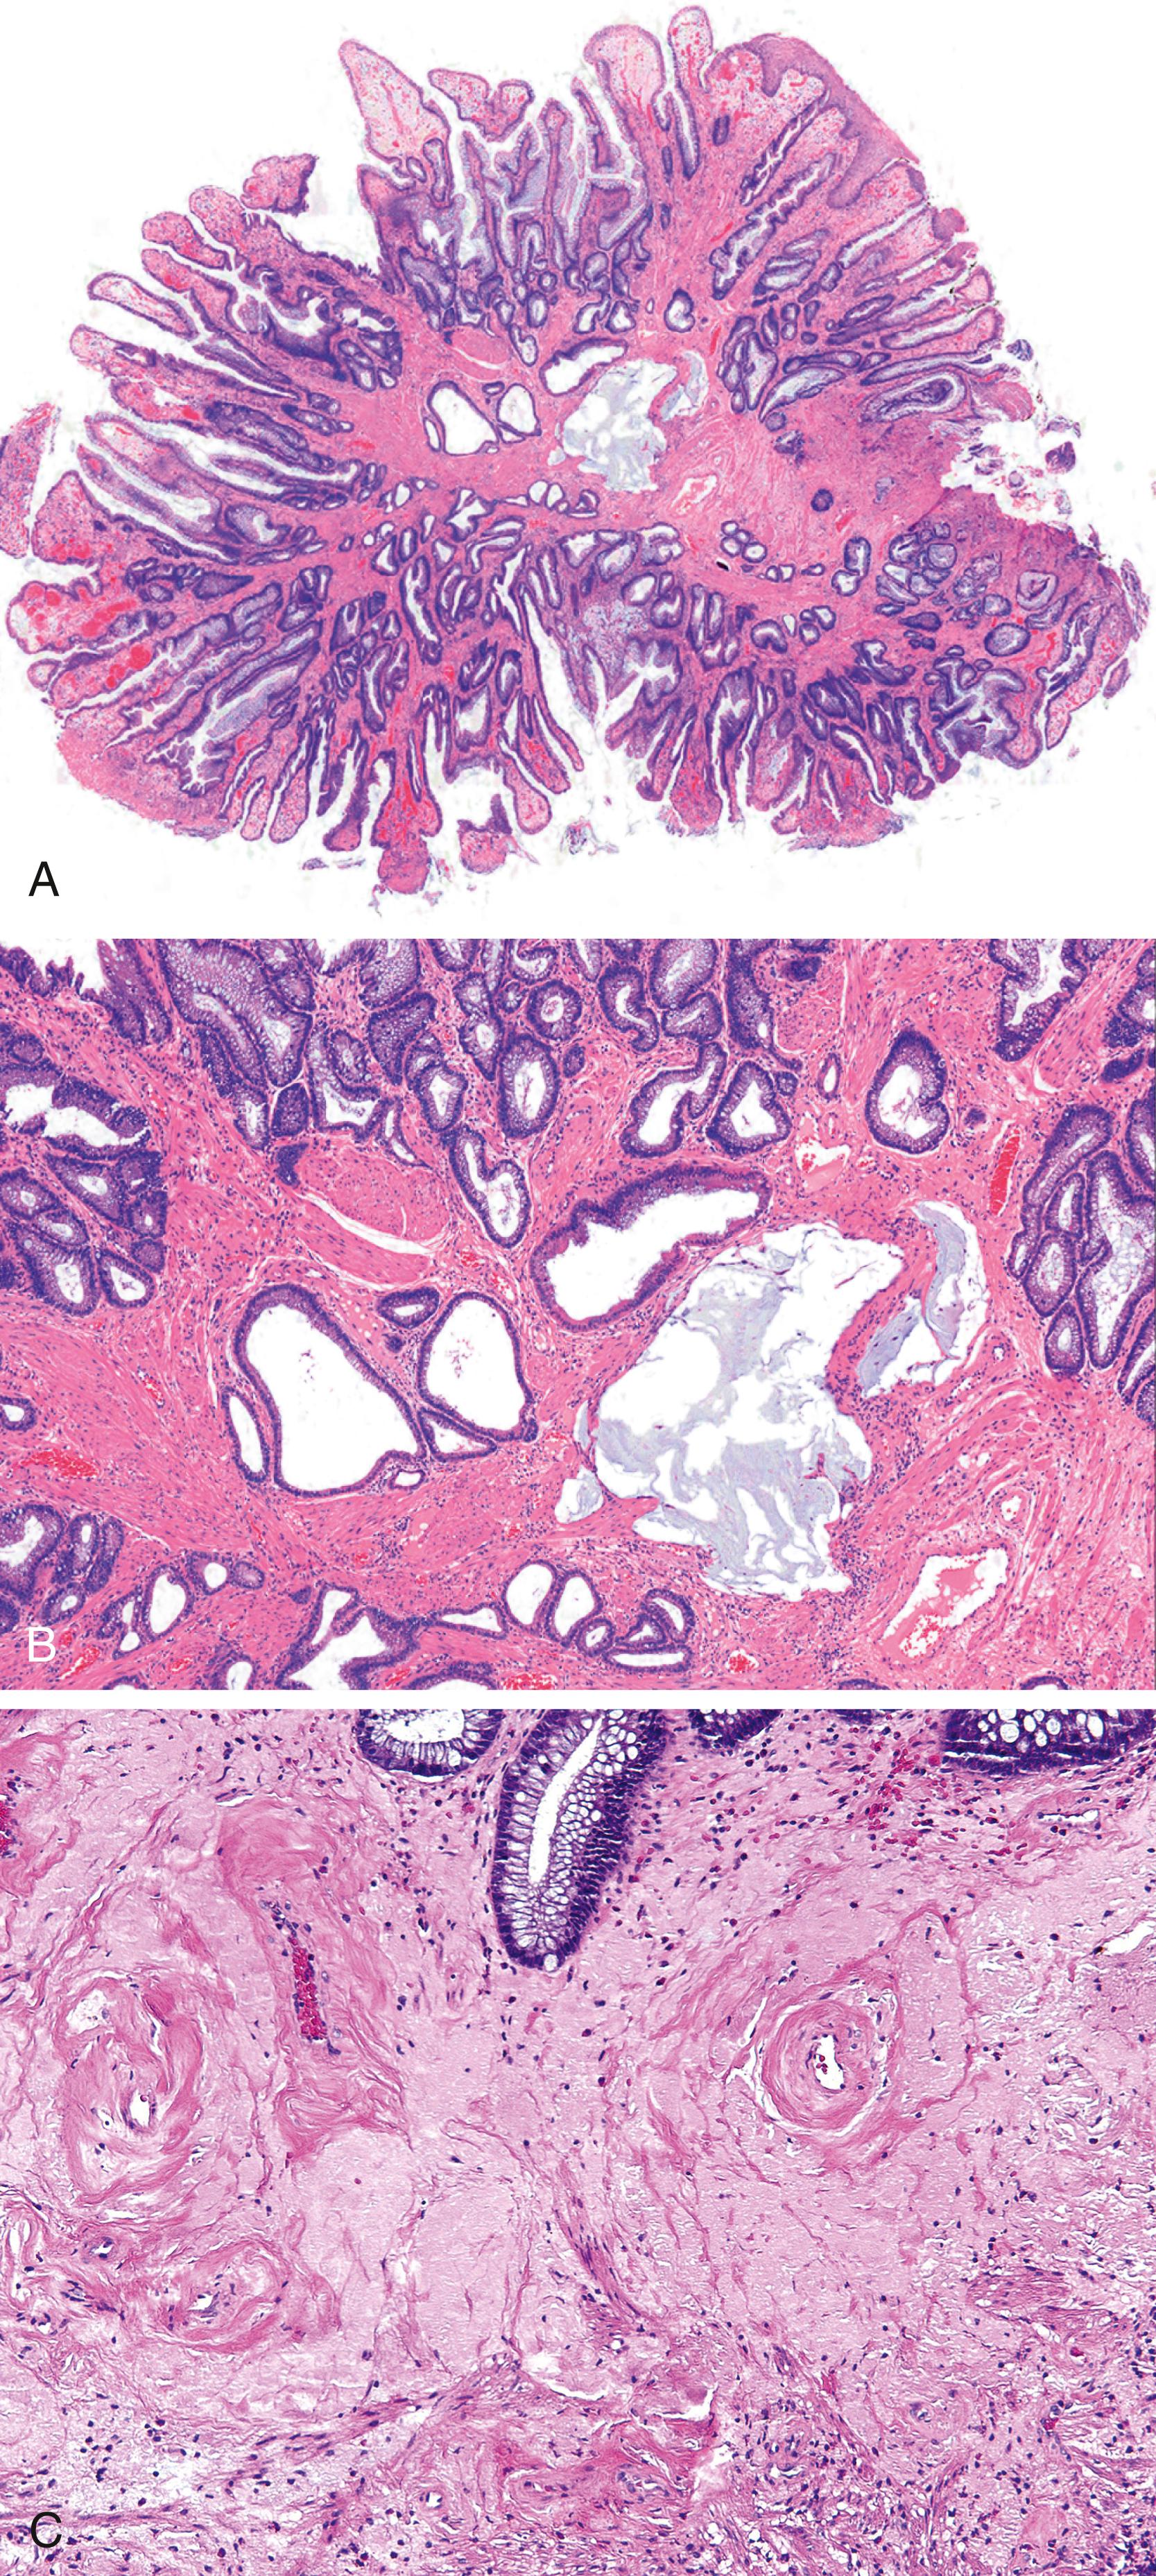 FIGURE 32.5, A, Low-power view of an inflammatory cloacogenic polyp. These lesions have a villiform appearance, incorporate anal squamous epithelium, display prominent crypt distortion, and show reactive epithelial changes. The epithelium often has a serrated architectural appearance that can cause diagnostic confusion with a serrated neoplasm. B, High-power view reveals smooth muscle ingrowth between the crypts and misplaced nonneoplastic crypts and acellular mucin. C, Stromal deposition of elastin, which is pale staining, among more densely eosinophilic collagen and smooth muscle. The elastin is a helpful clue to chronic trauma-related injury.